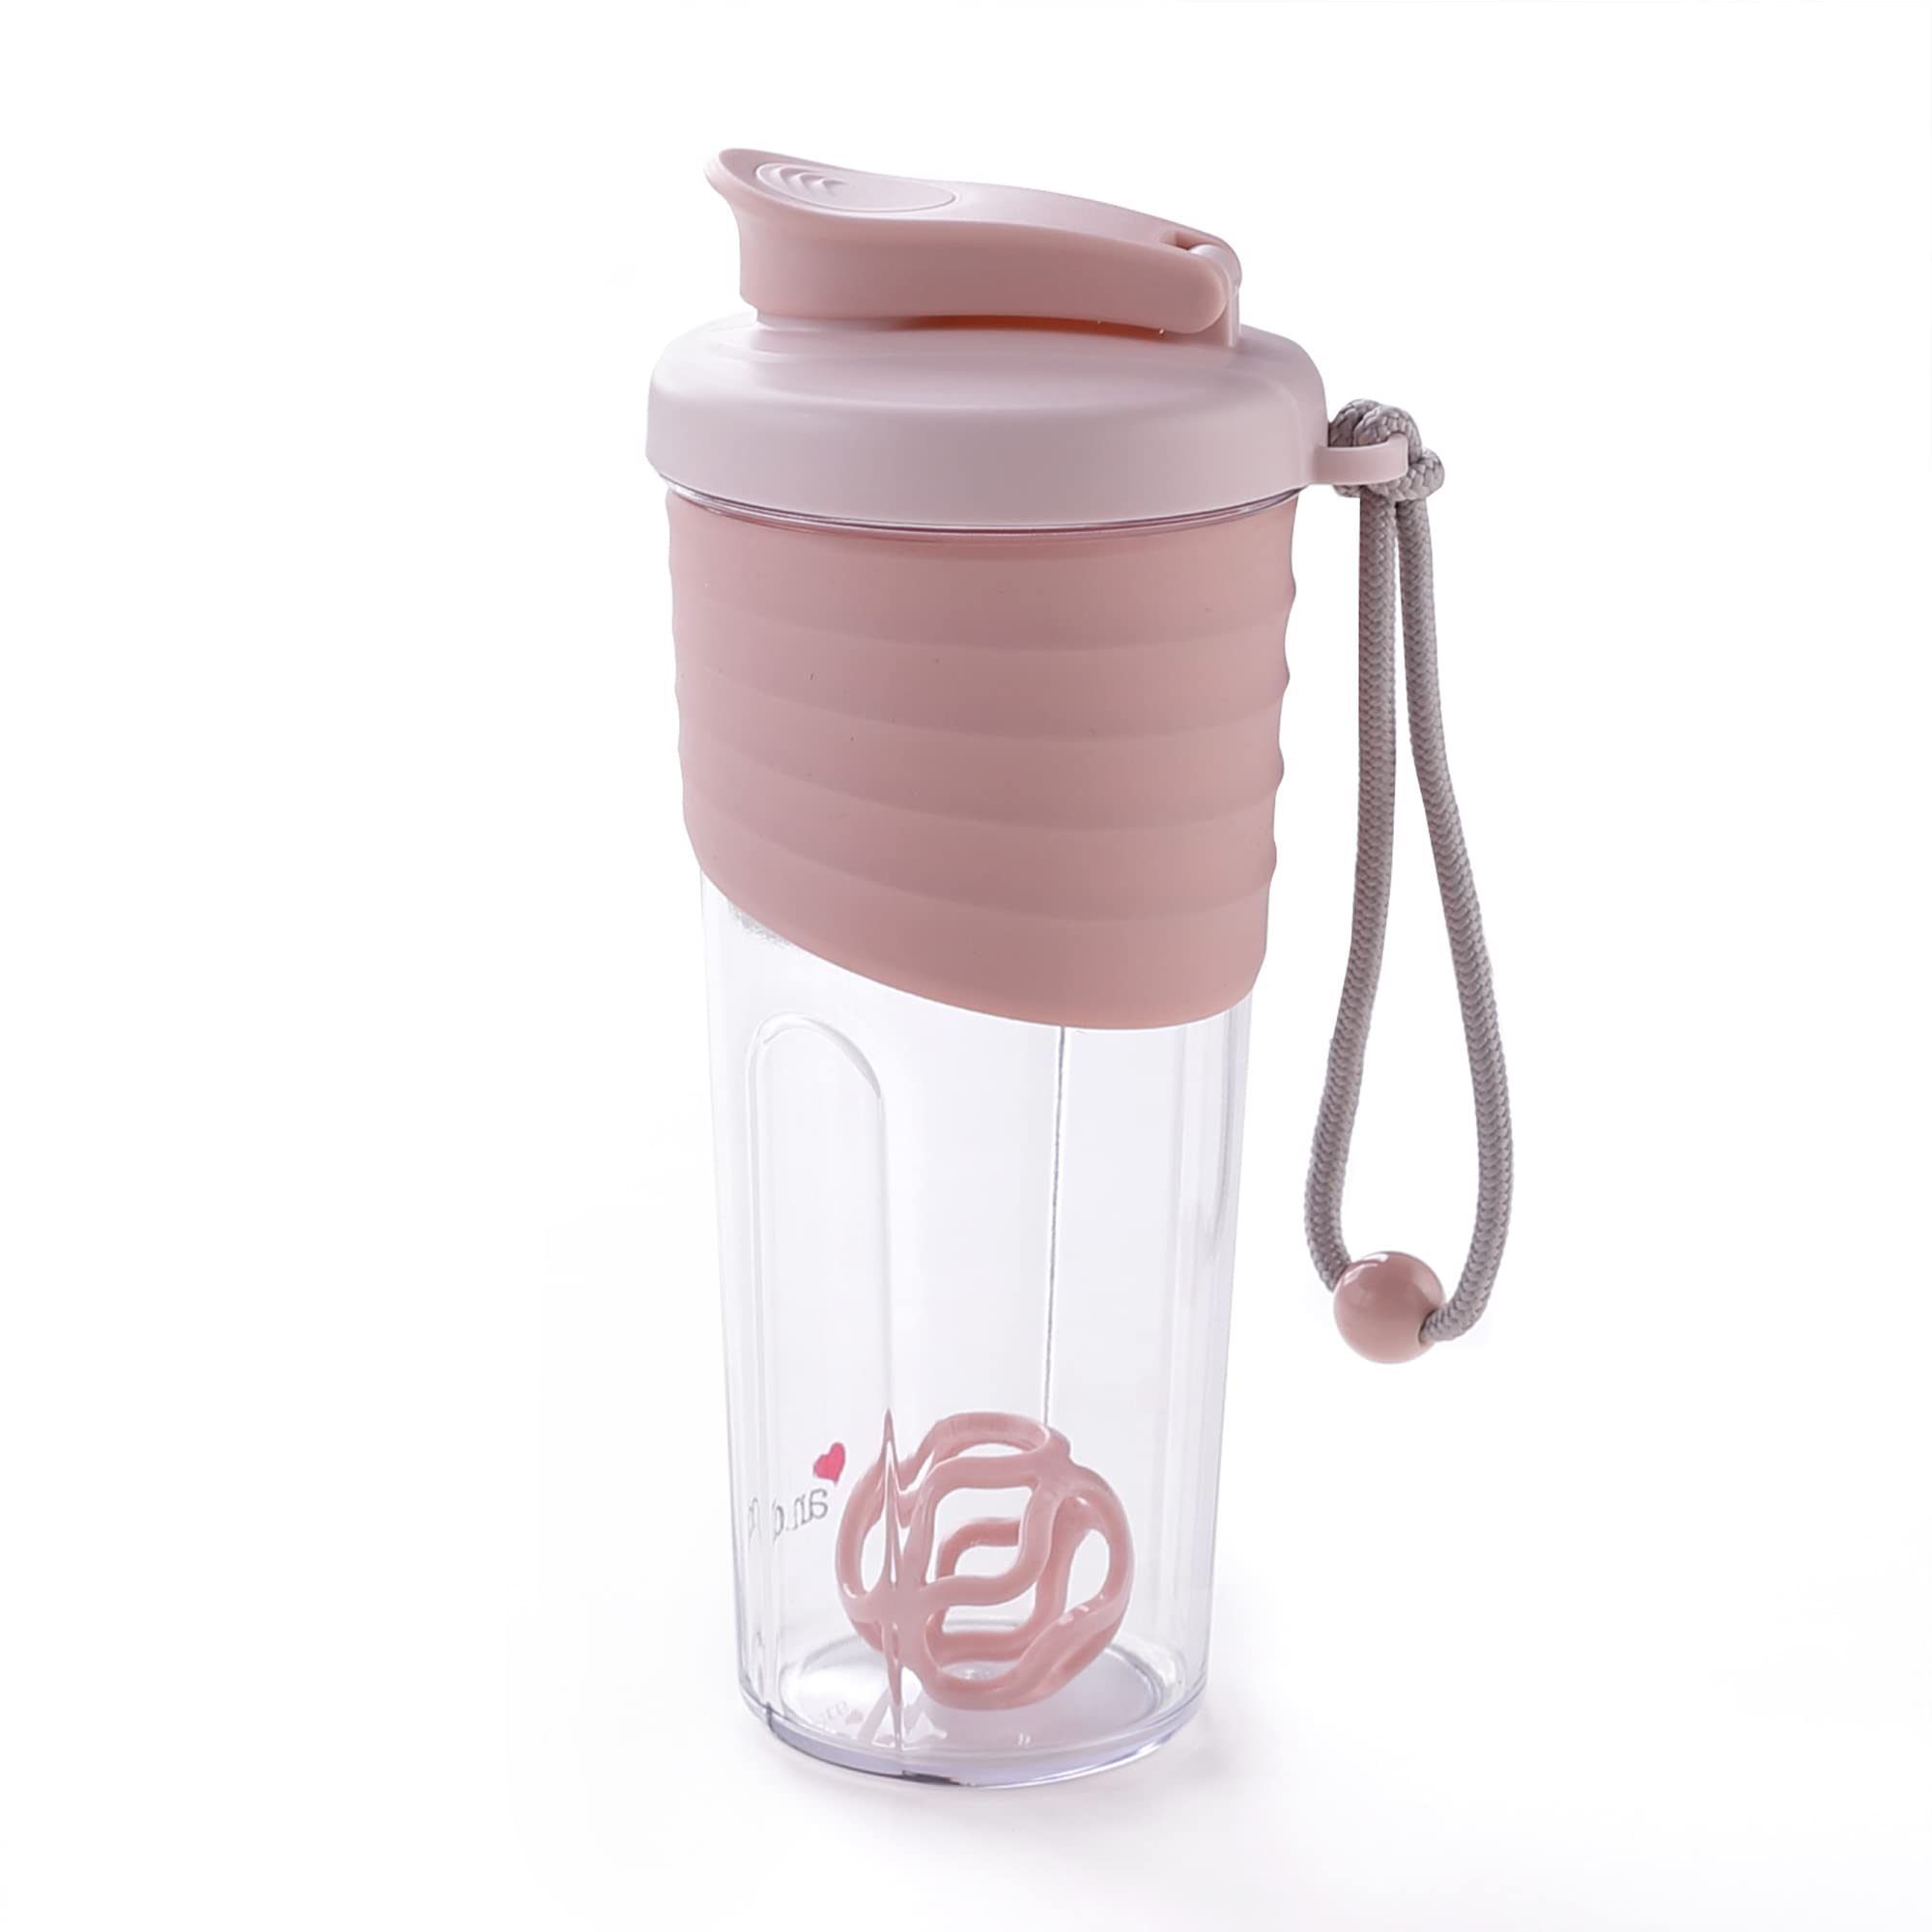 & ME andMe Protein Shaker Bottle - 700 ml with silicone sleeve| Shaker for Pre-Post Workout Supplement Protein Shake Gym Sipper (Pink Color)